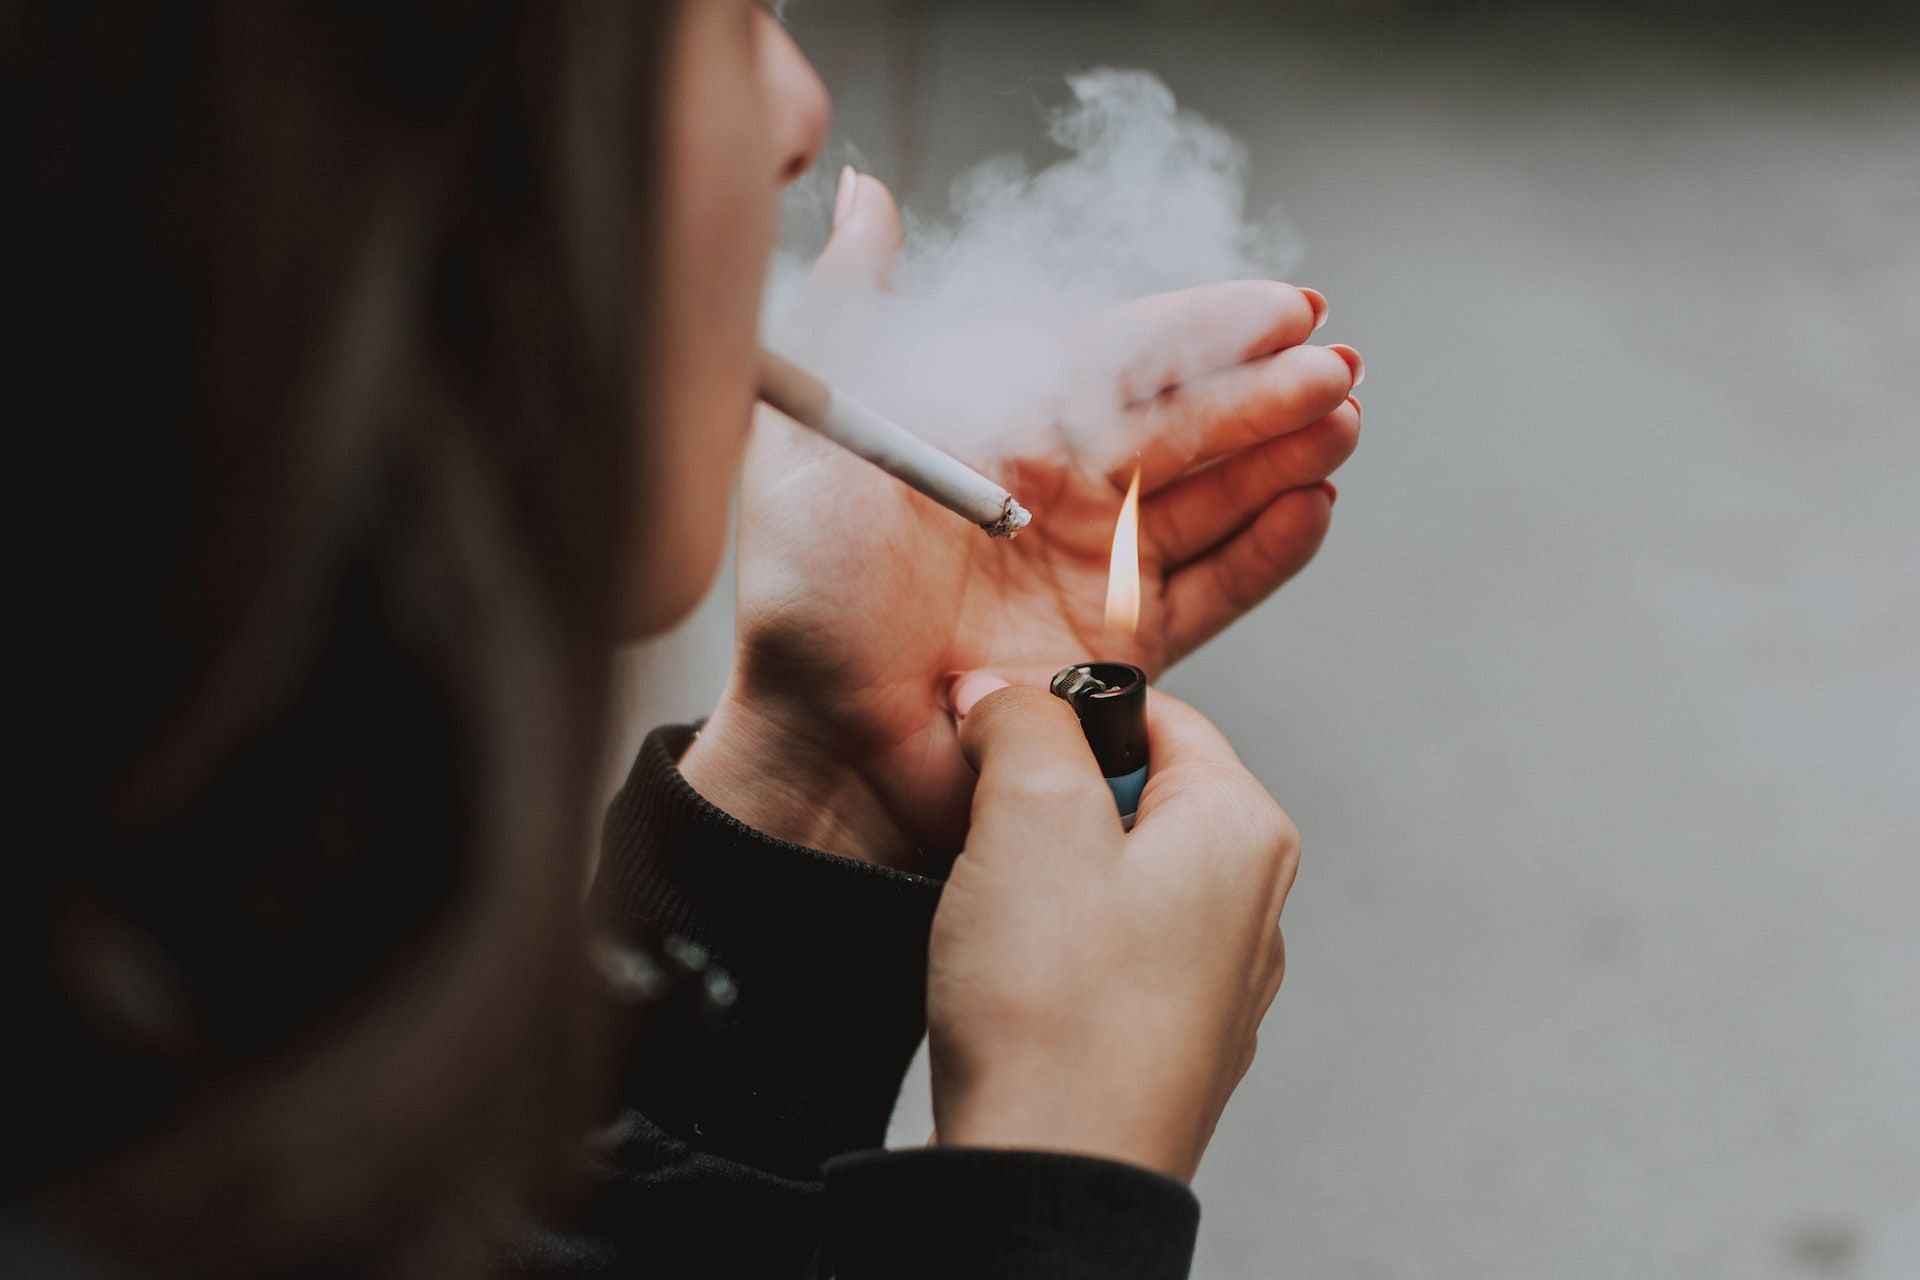 Smoking can trigger multiple sclerosis. (Photo via Pexels/lil artsy)